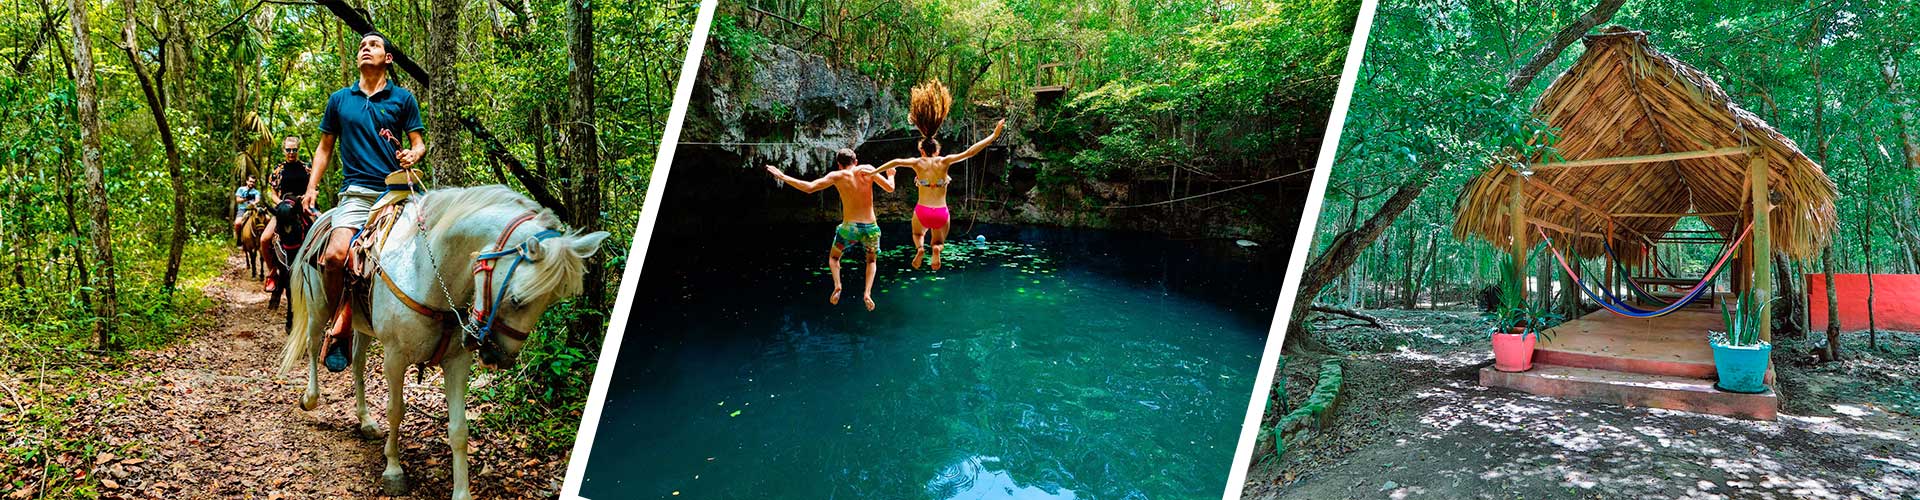 Horseback riding experience and cenotes in Cancun